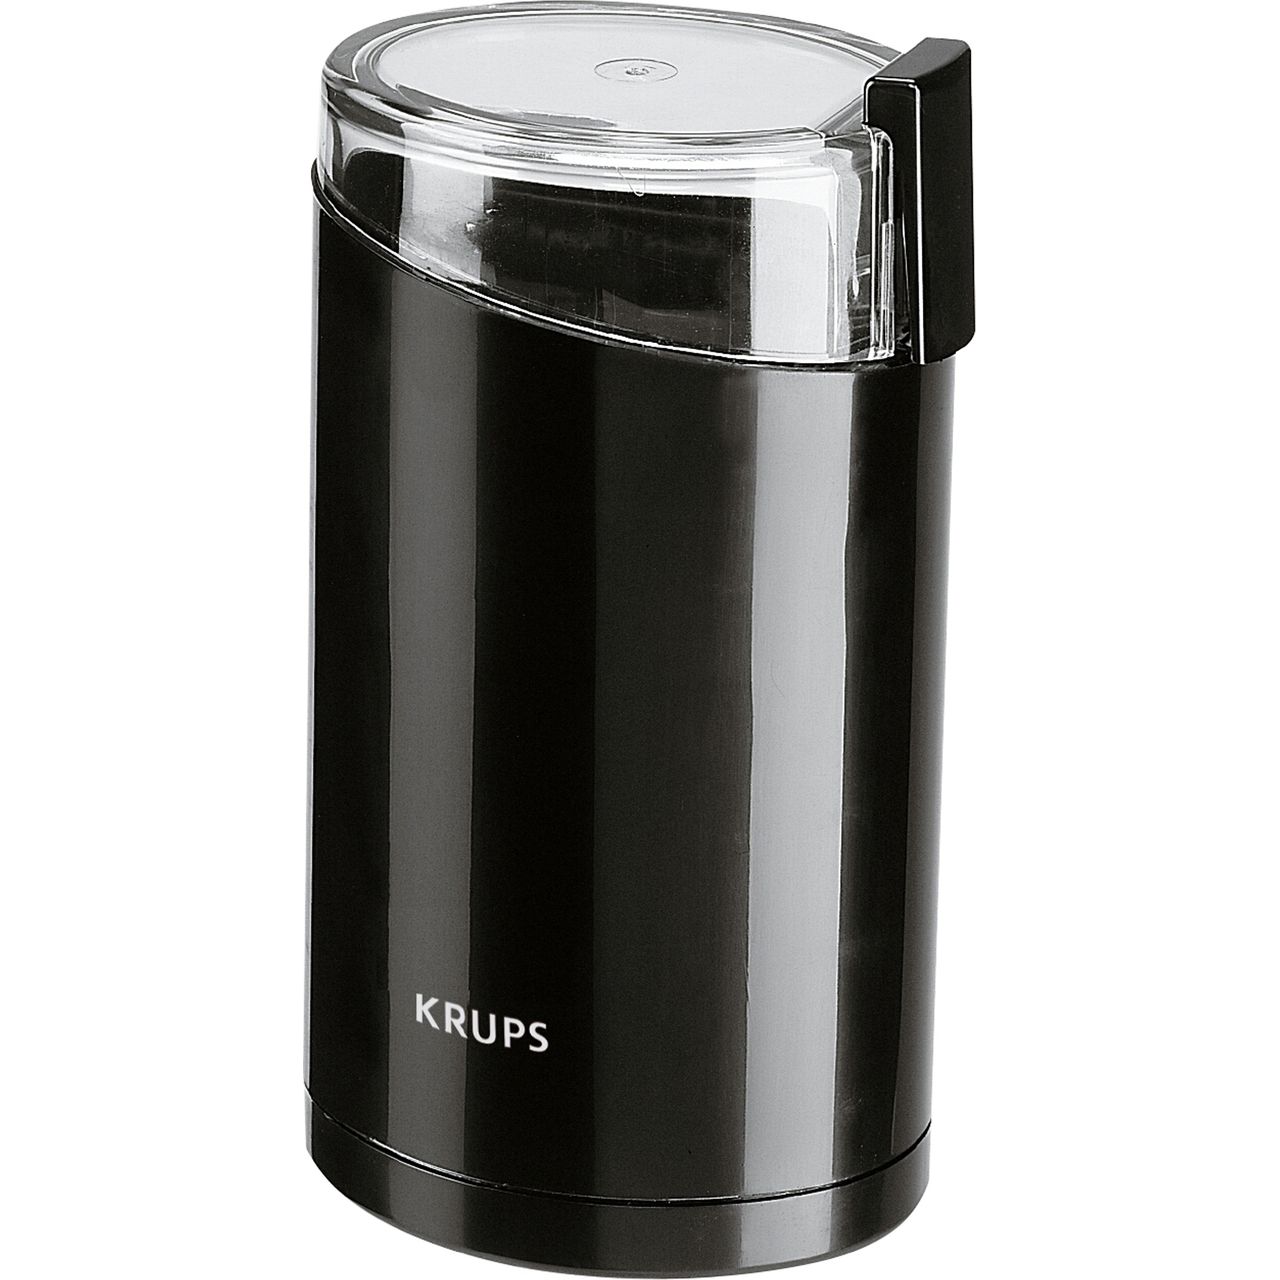 Krups Everyday Coffee and Spice Mill F2034240 Coffee Grinder Review